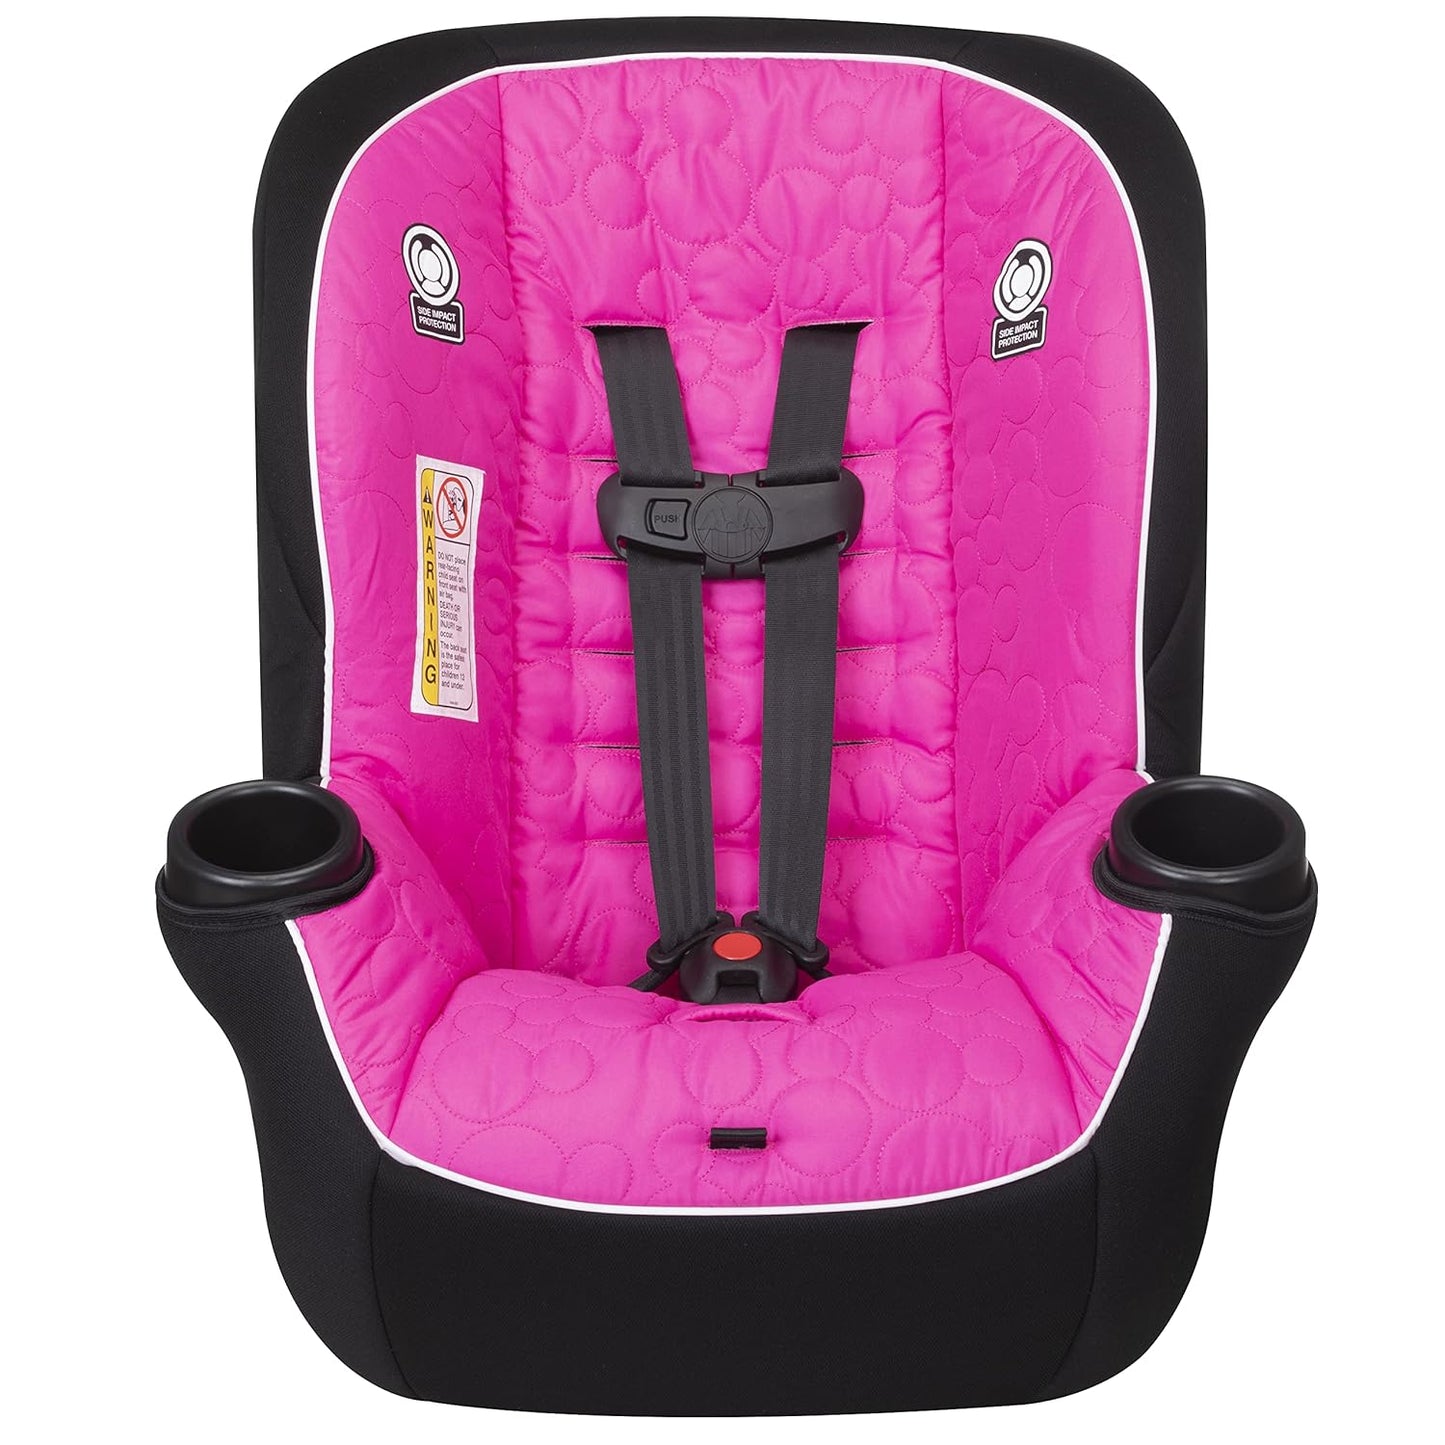 Disney Baby Onlook 2-in-1 Convertible Car Seat, Rear-Facing 5-40 pounds and Forward-Facing 22-40 pounds and up to 43 inches, Mouseketeer Minnie